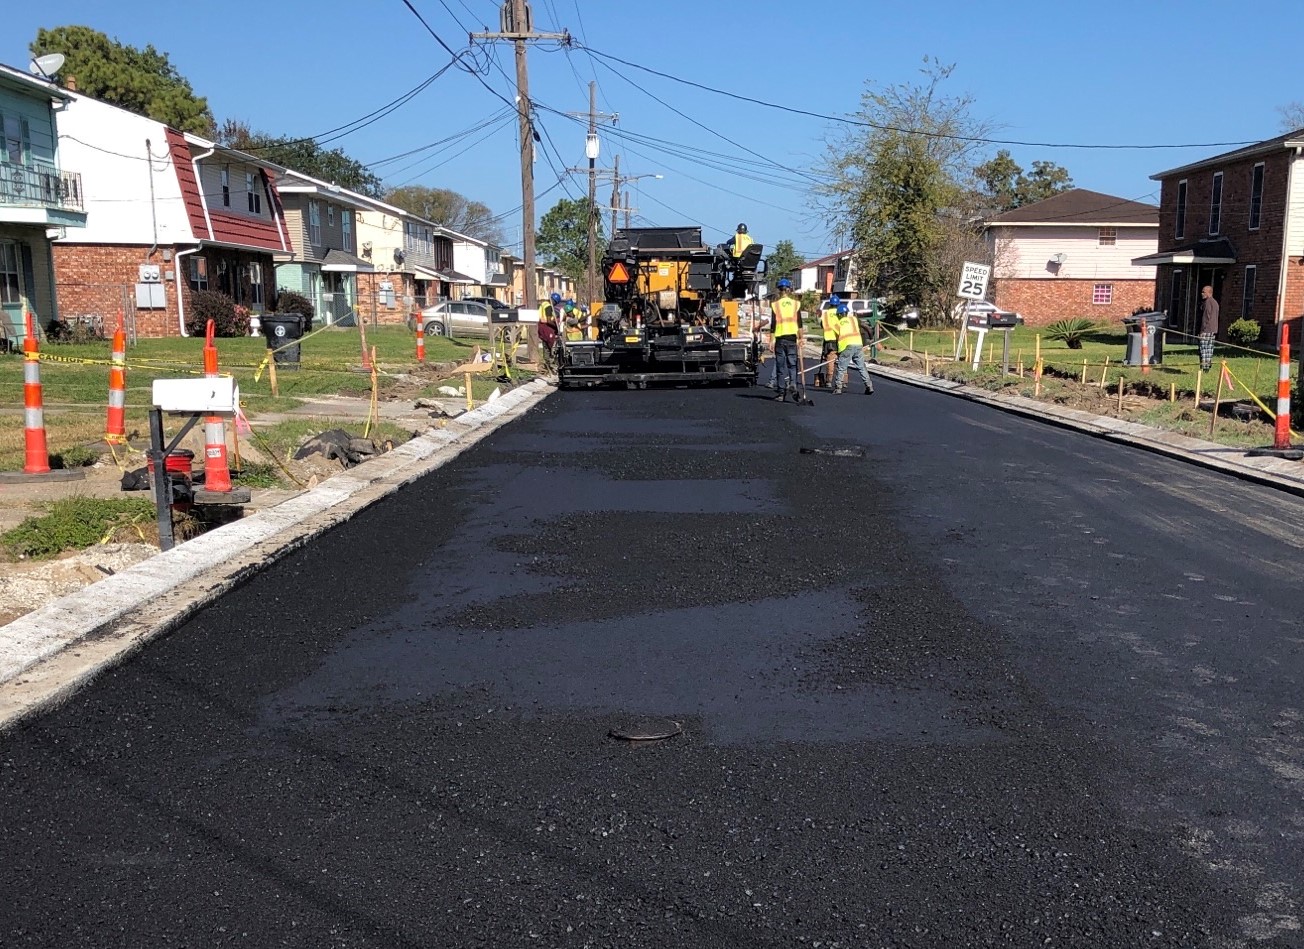 PINES VILLAGE GROUP A CONTINUES WITH PAVEMENT RESTORATION AND SIDEWALK INSTALLATION